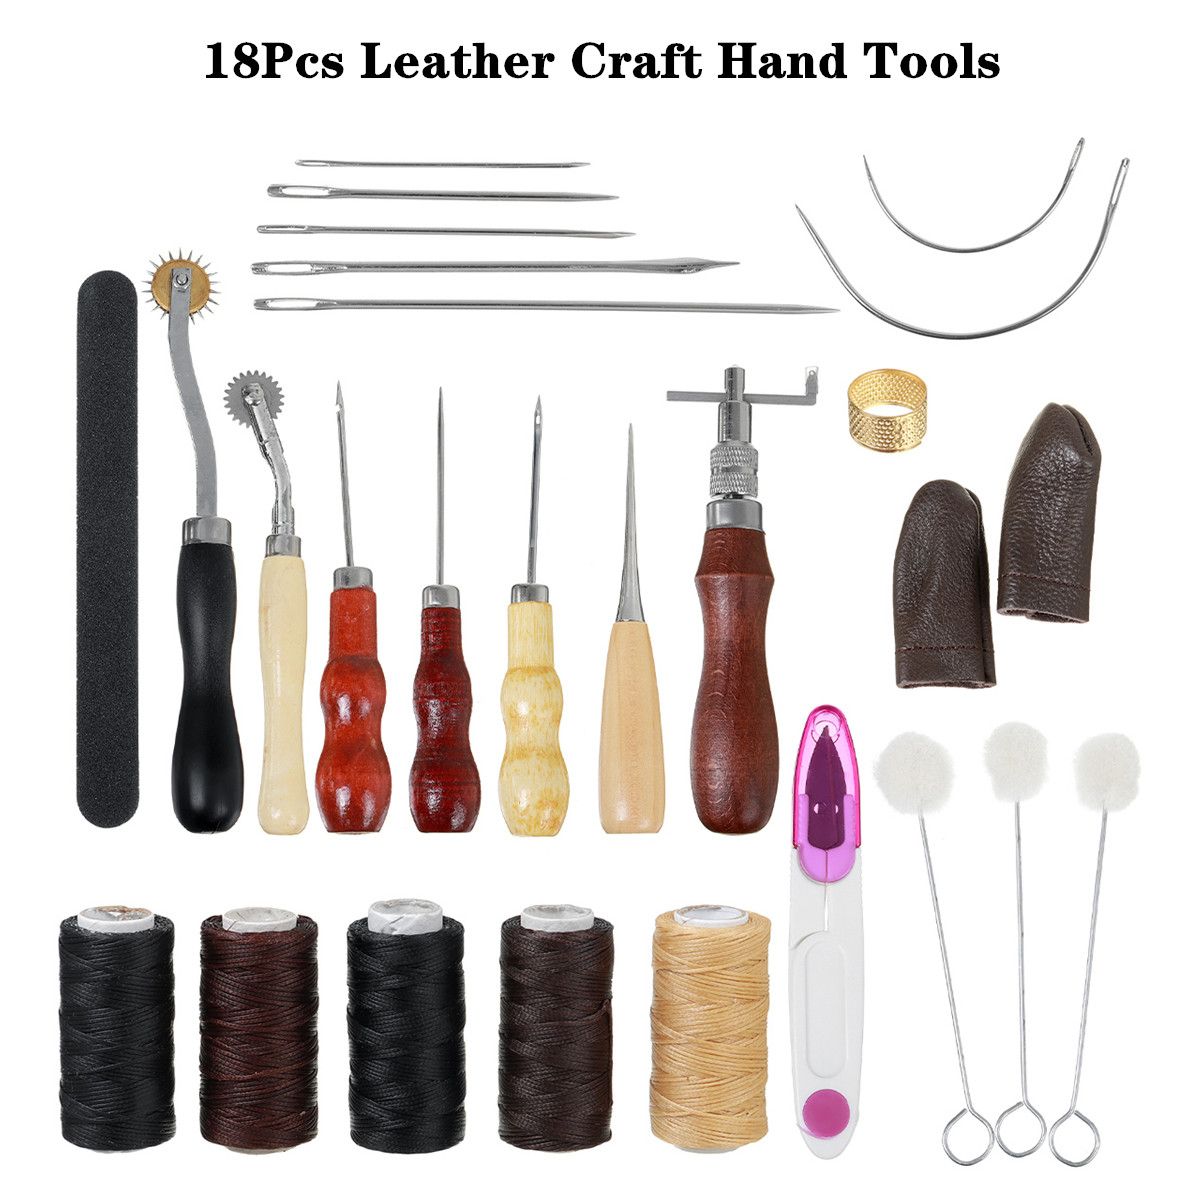 18Pcs-Professional-Vintage-Leather-Craft-Tools-Hand-Sewing-Kit-Punch-Stitching-1757122